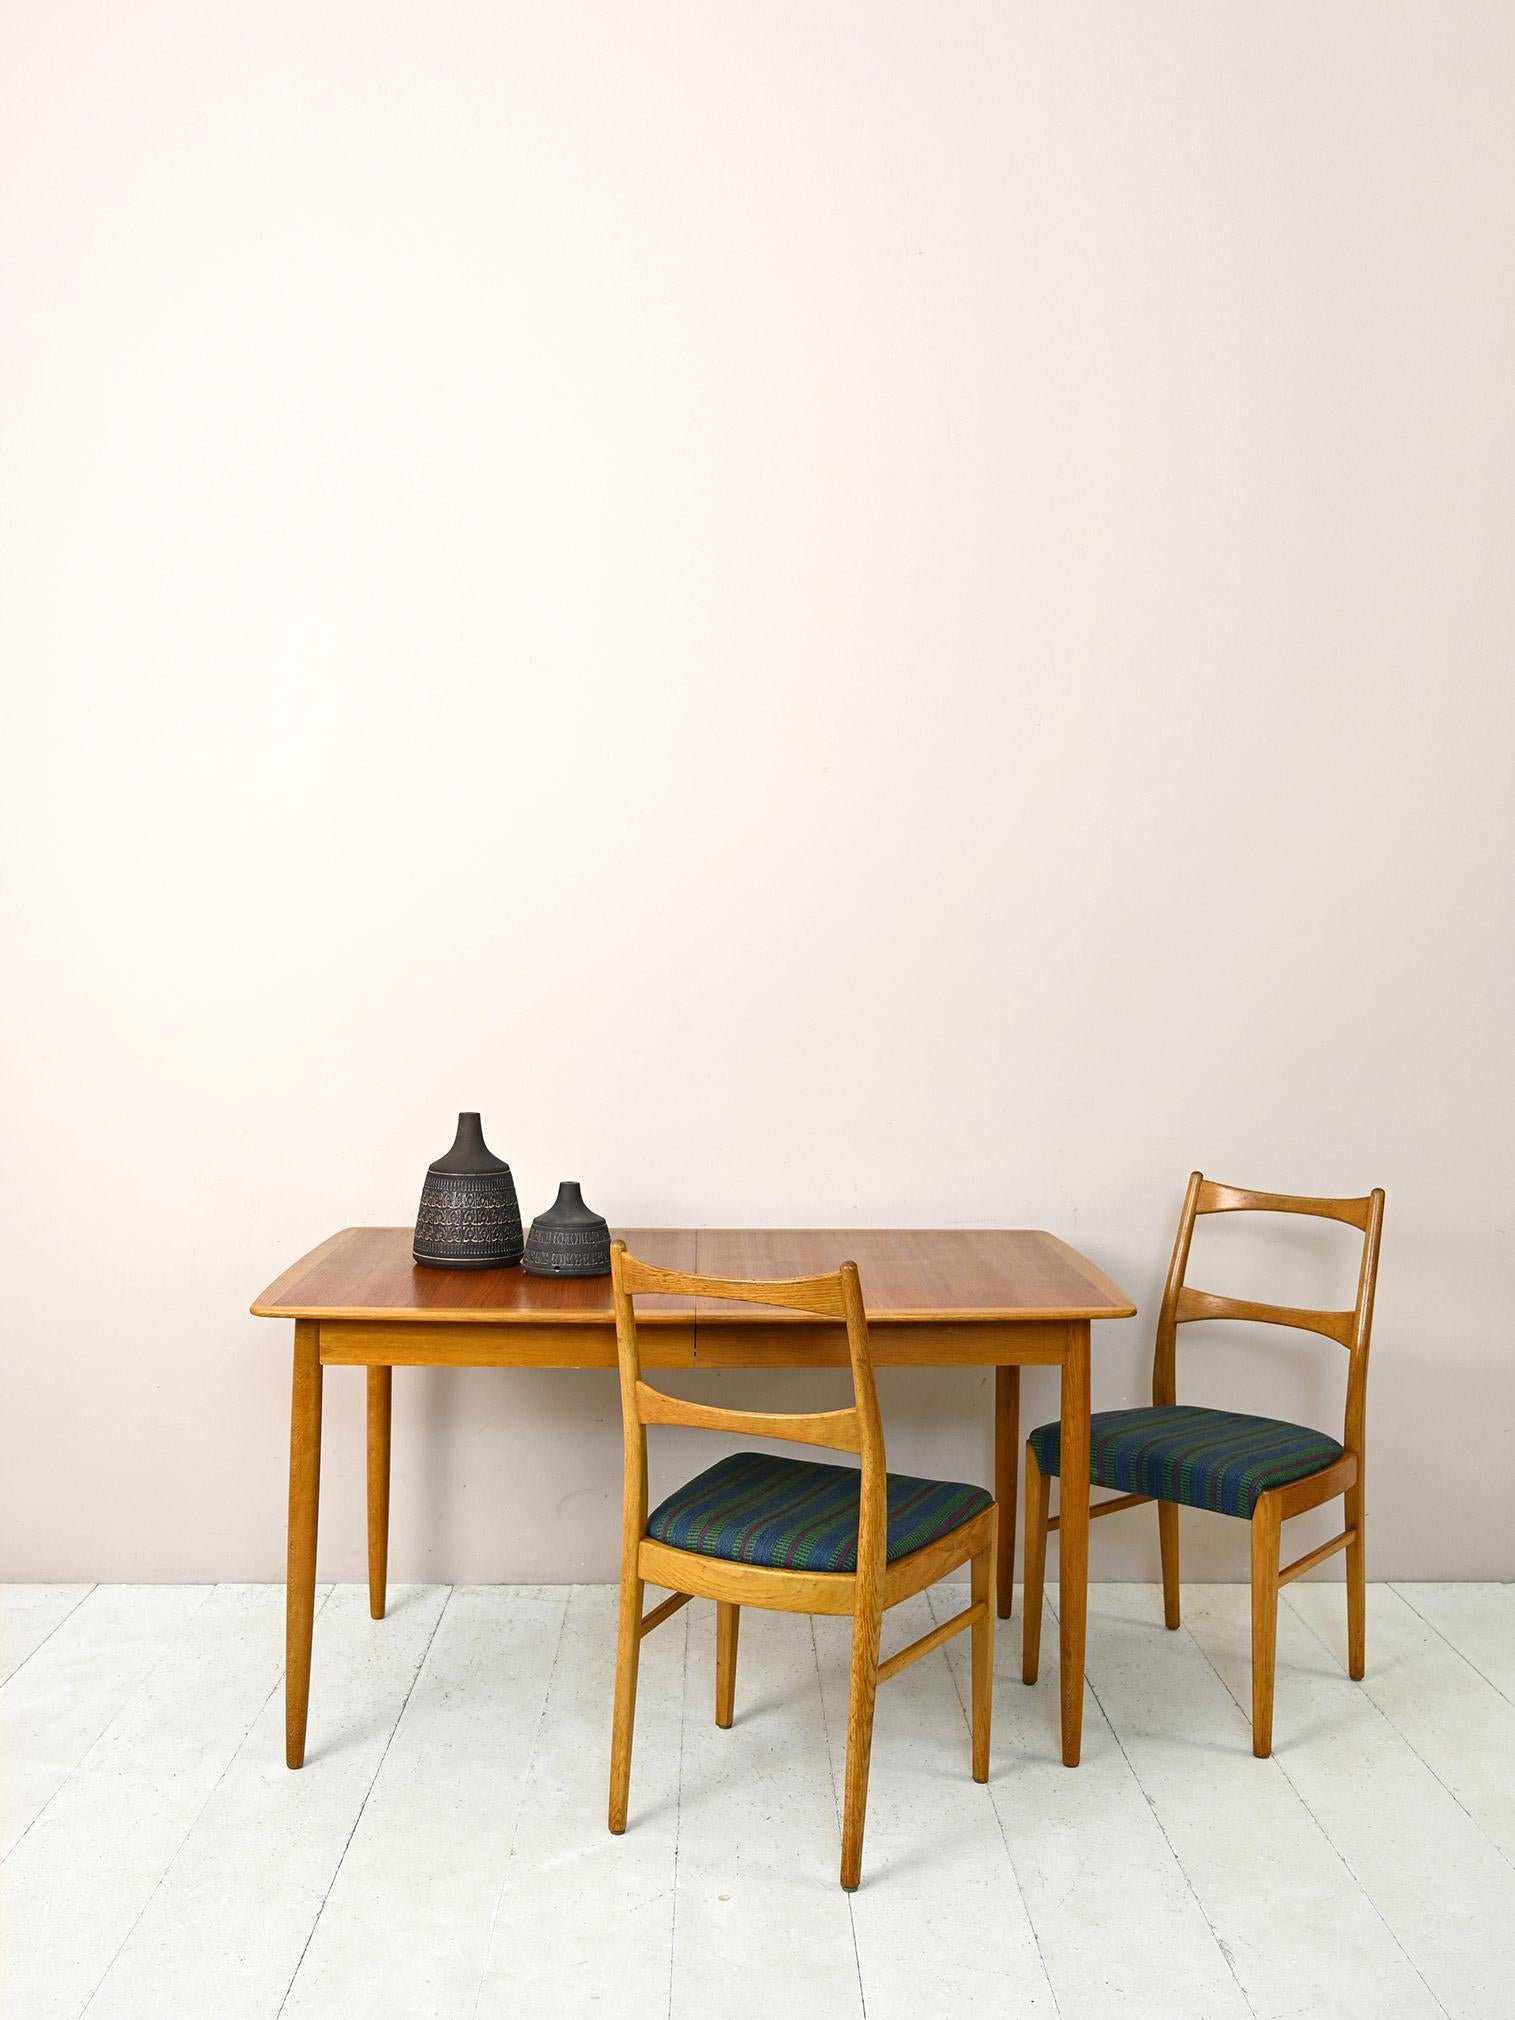 Dining table of Scandinavian manufacture from the 1960s.
A practical piece of furniture in perfect Scandinavian style, consisting of a soft-edged top whose light oak wood profile outlines its perimeter.
The solid wood tapered legs are slightly